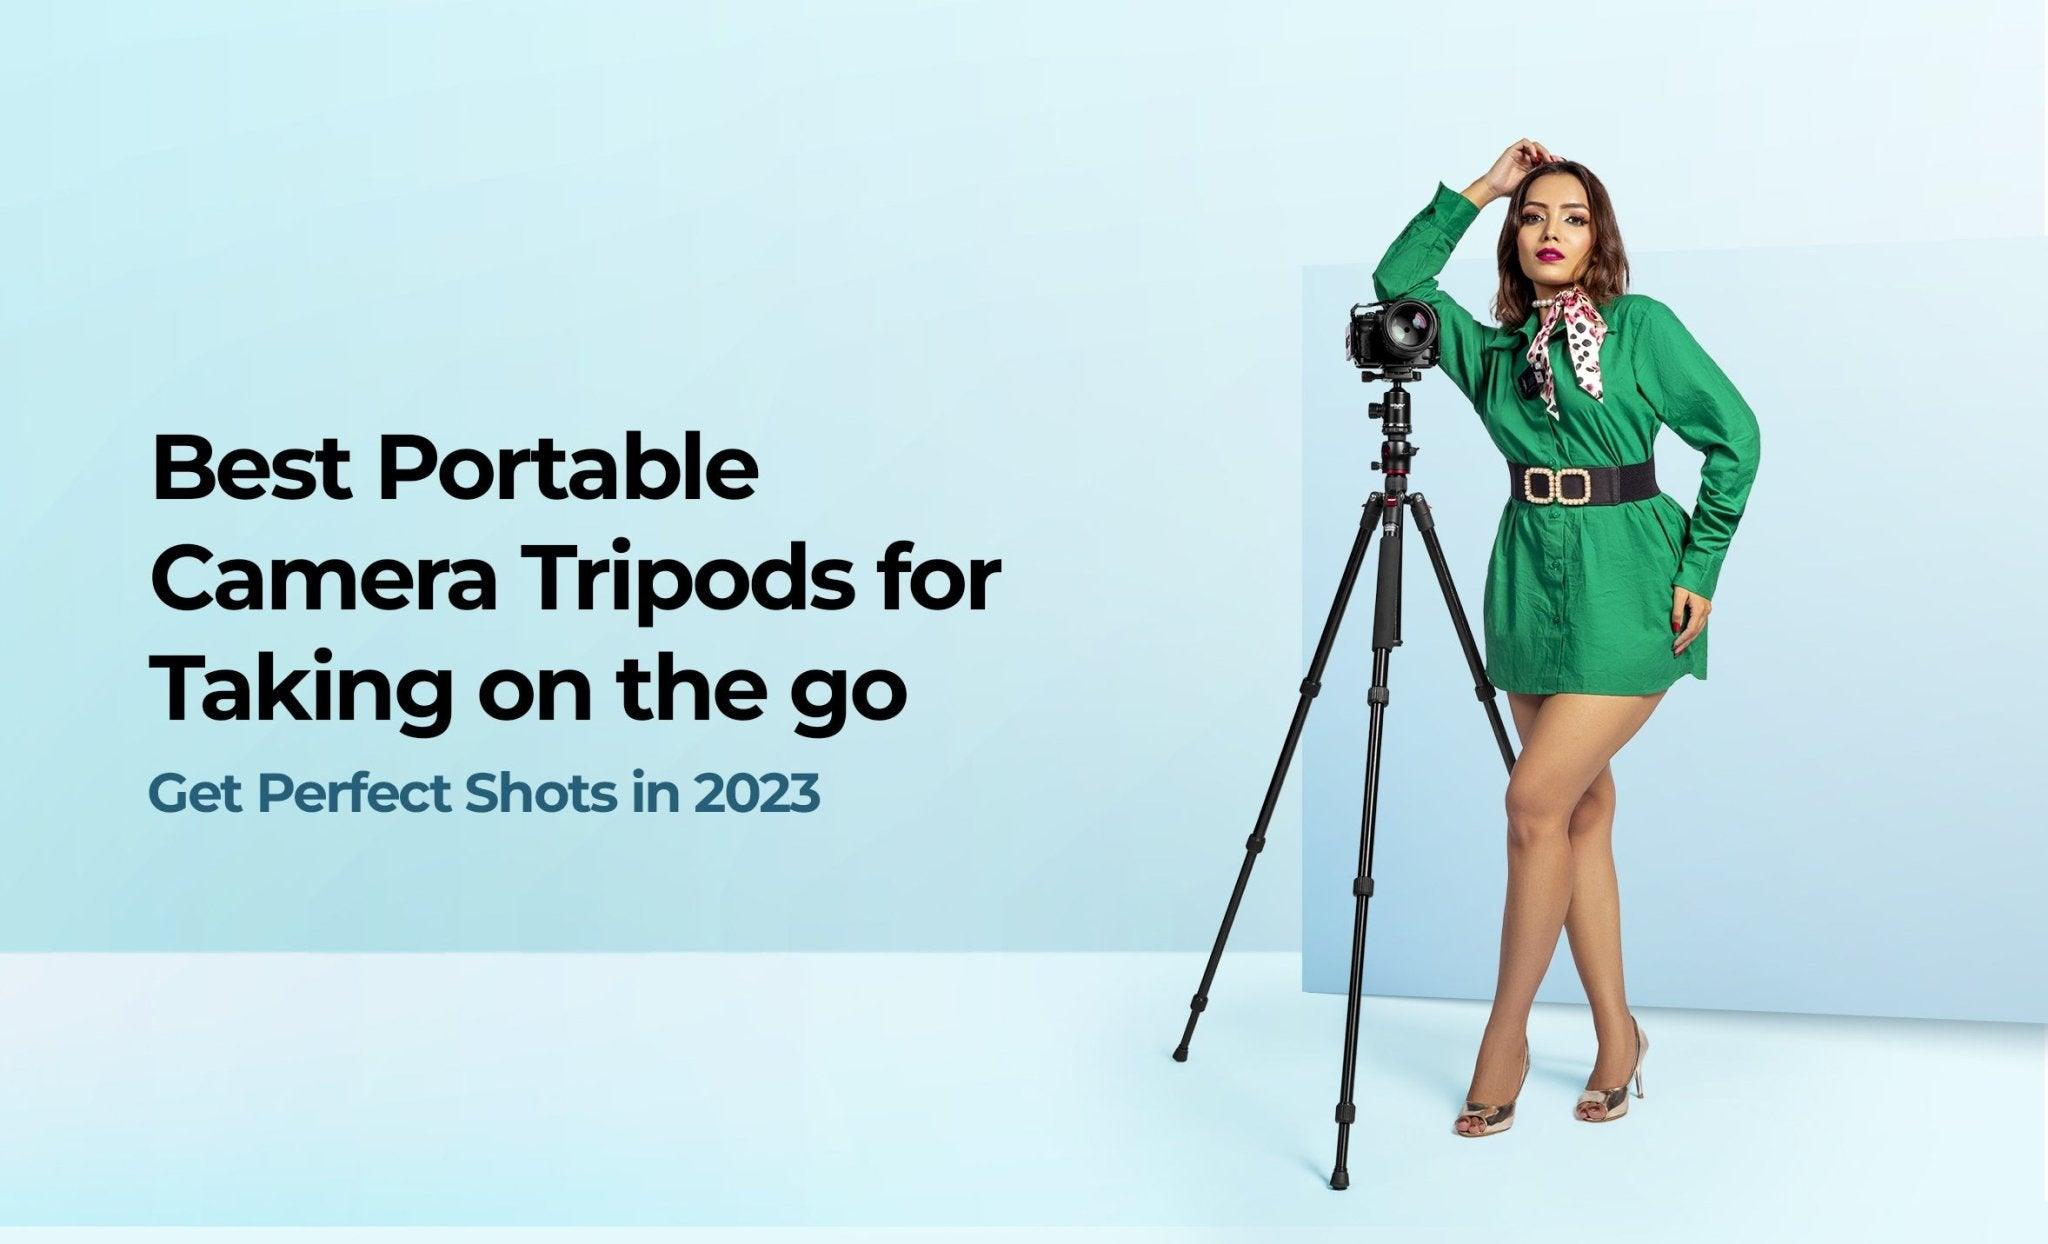 Best Portable Camera Tripods for Taking on the Go: Get Perfect Shots in 2023